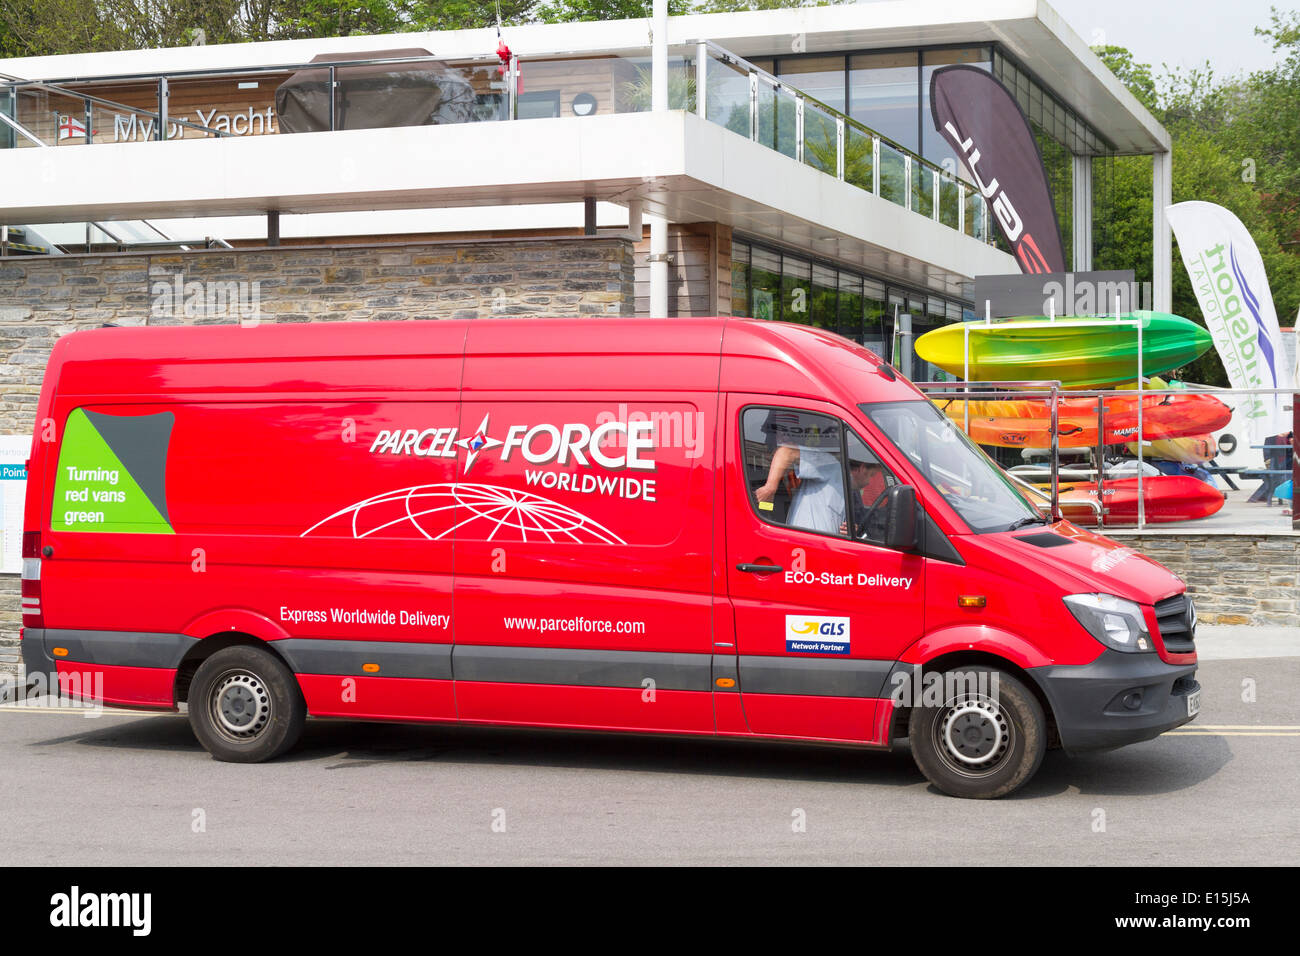 Parcel Force Van High Resolution Stock Photography and Images - Alamy